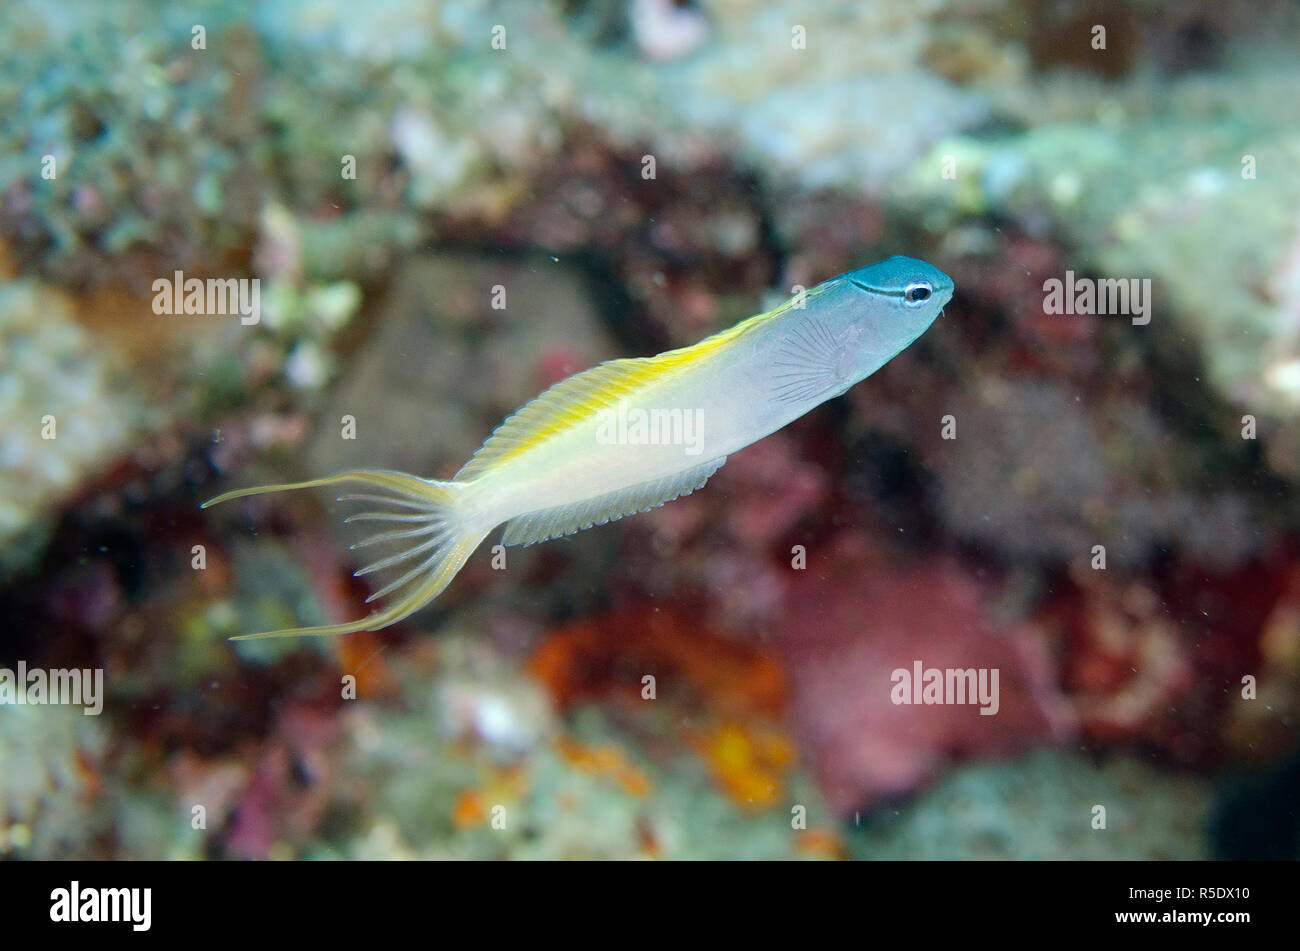 Yellowtail Fangblenny, Meiacanthus atrodorsalis, aka Forktail Blenny, Pyramids dive site, Amed, east Bali, Indonesia, Indian Ocean Stock Photo